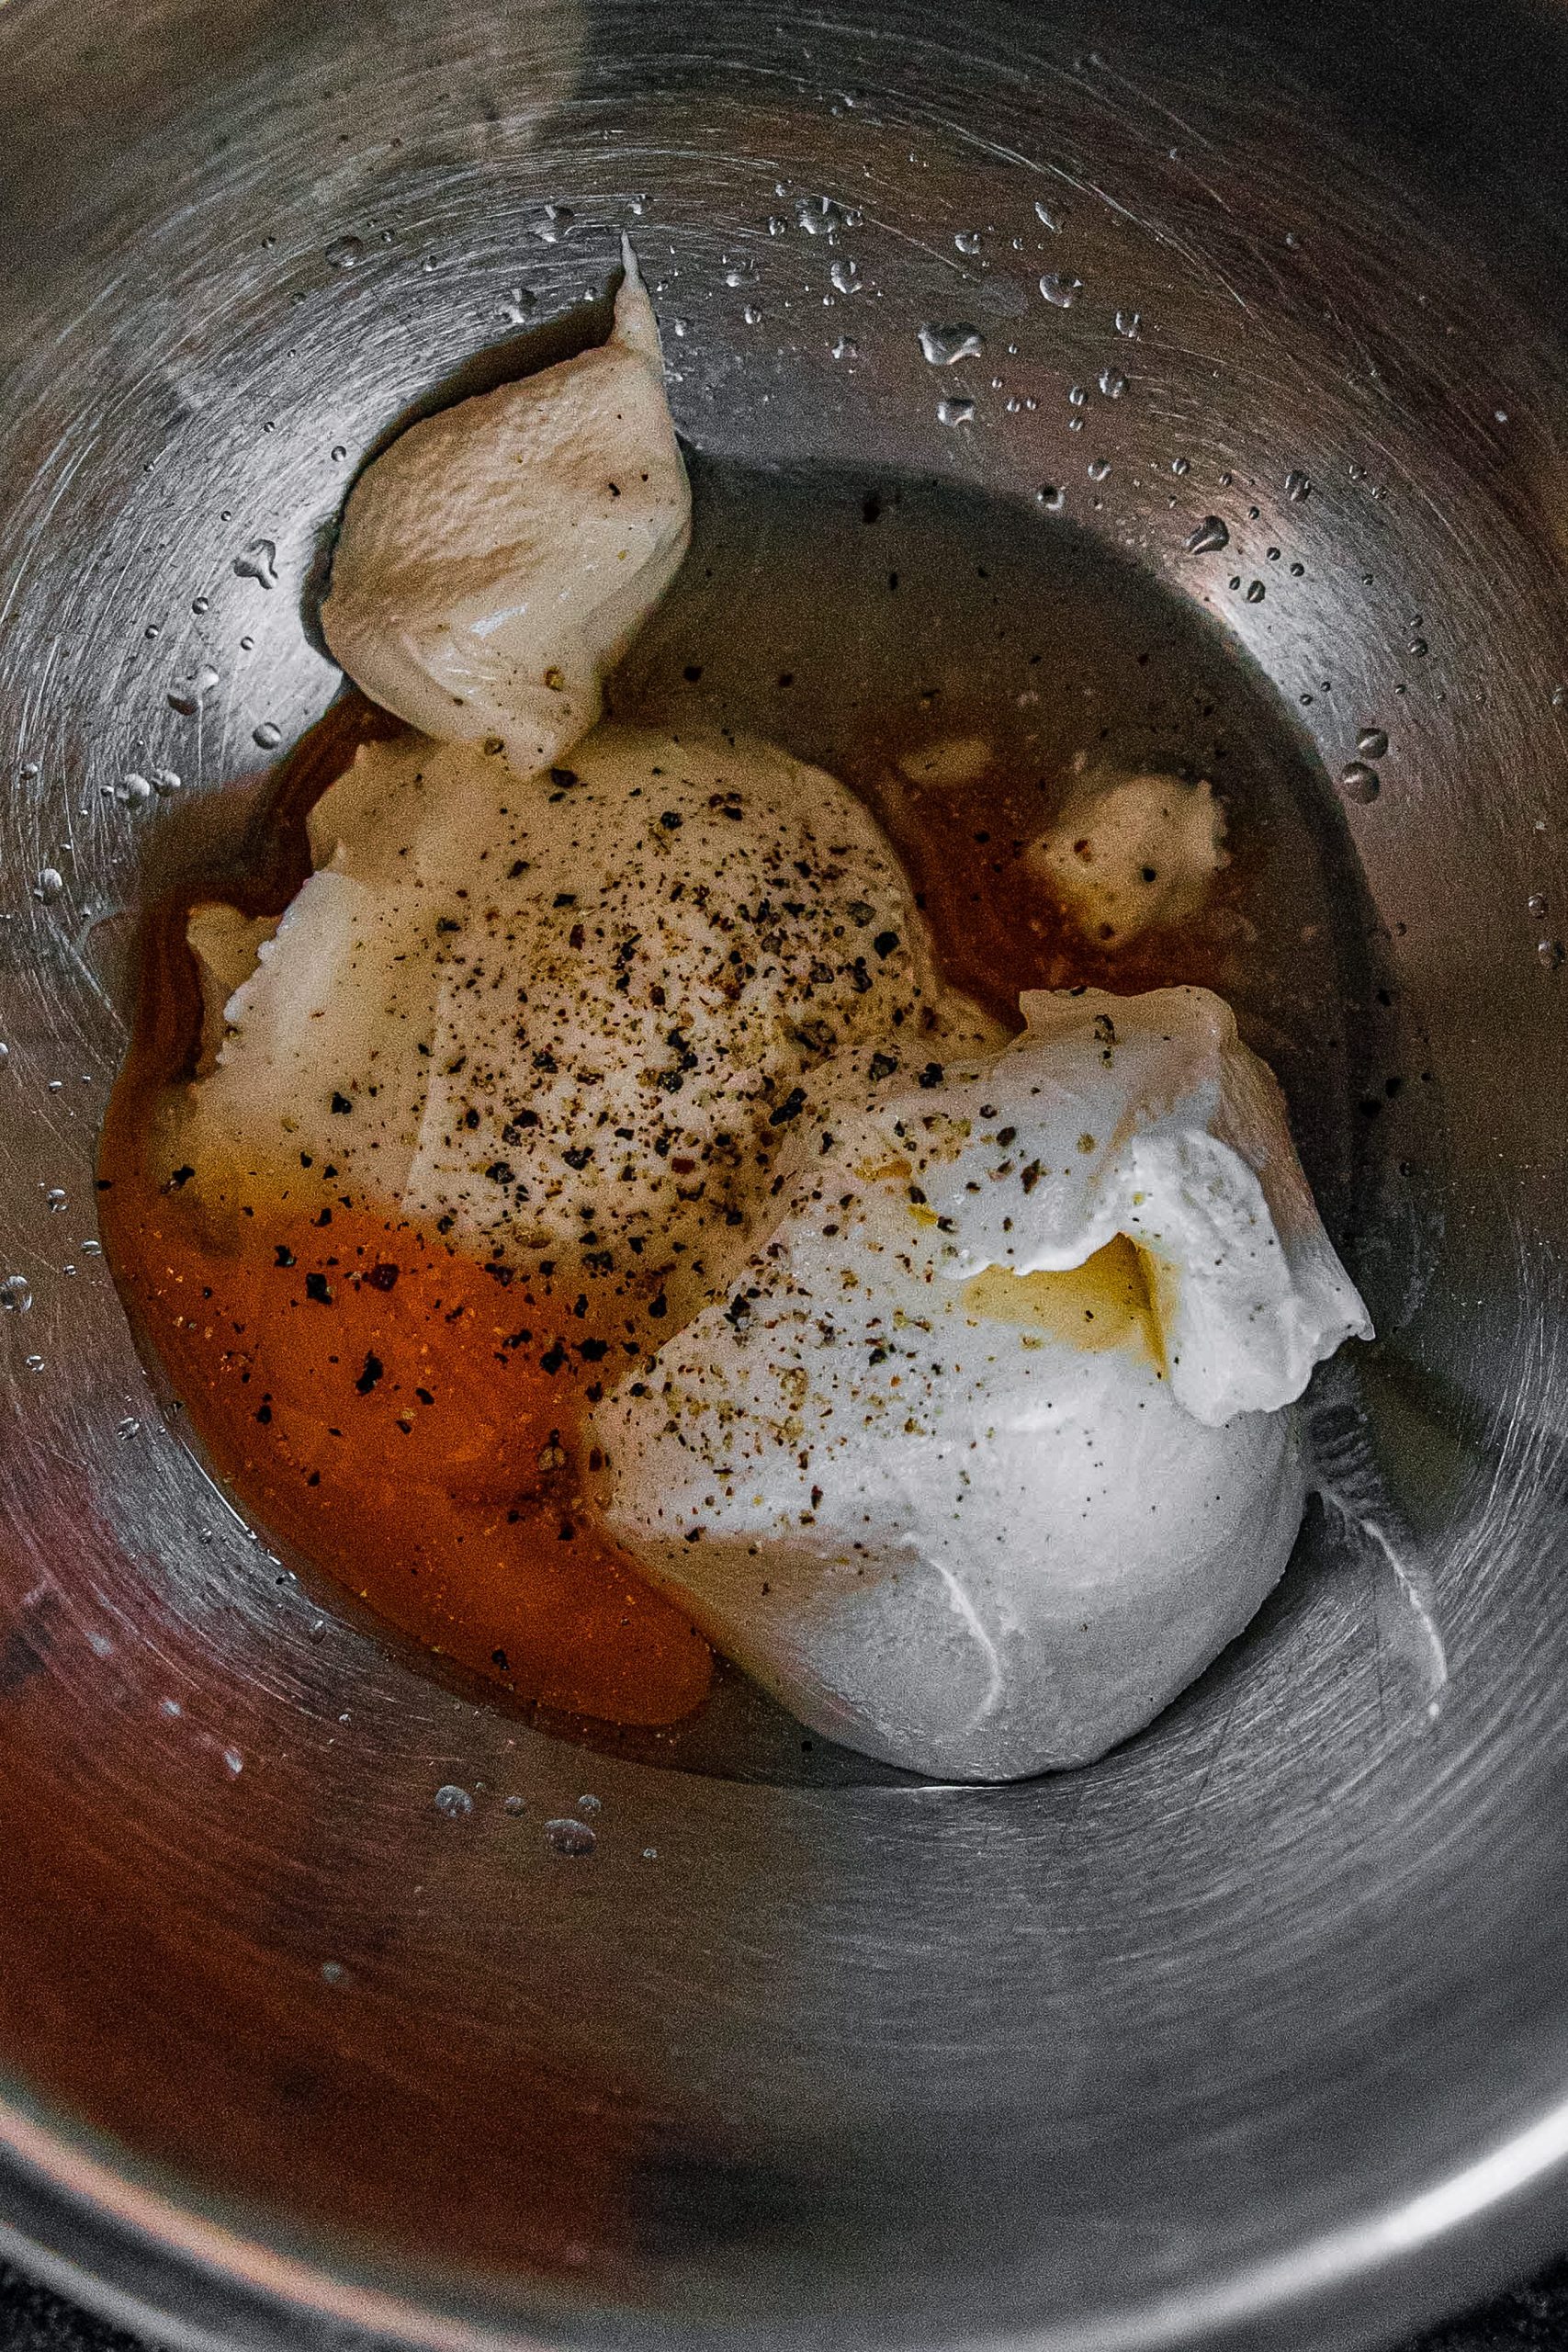 In a bowl, combine sour cream, egg yolks, pimento, cooking wine, salt and pepper. Set aside.